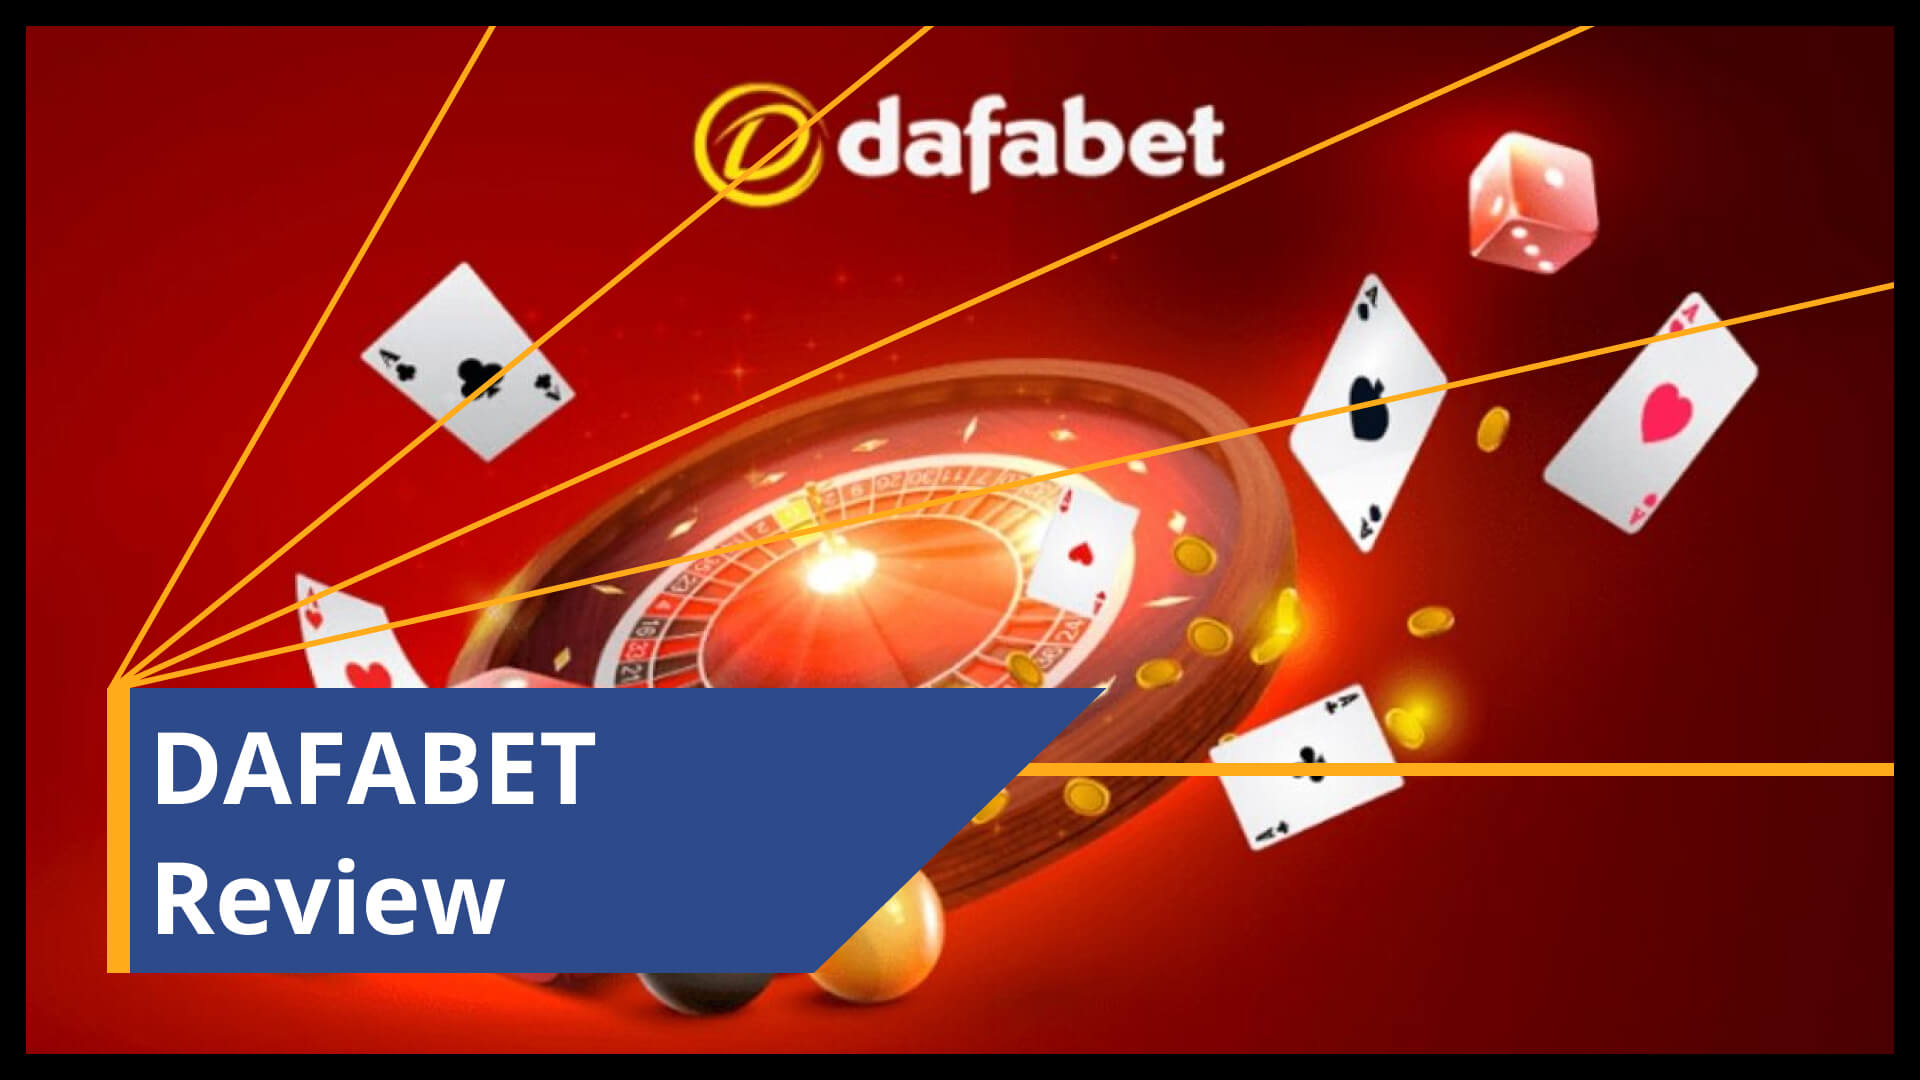 Play more with Dafabet Mobile casino